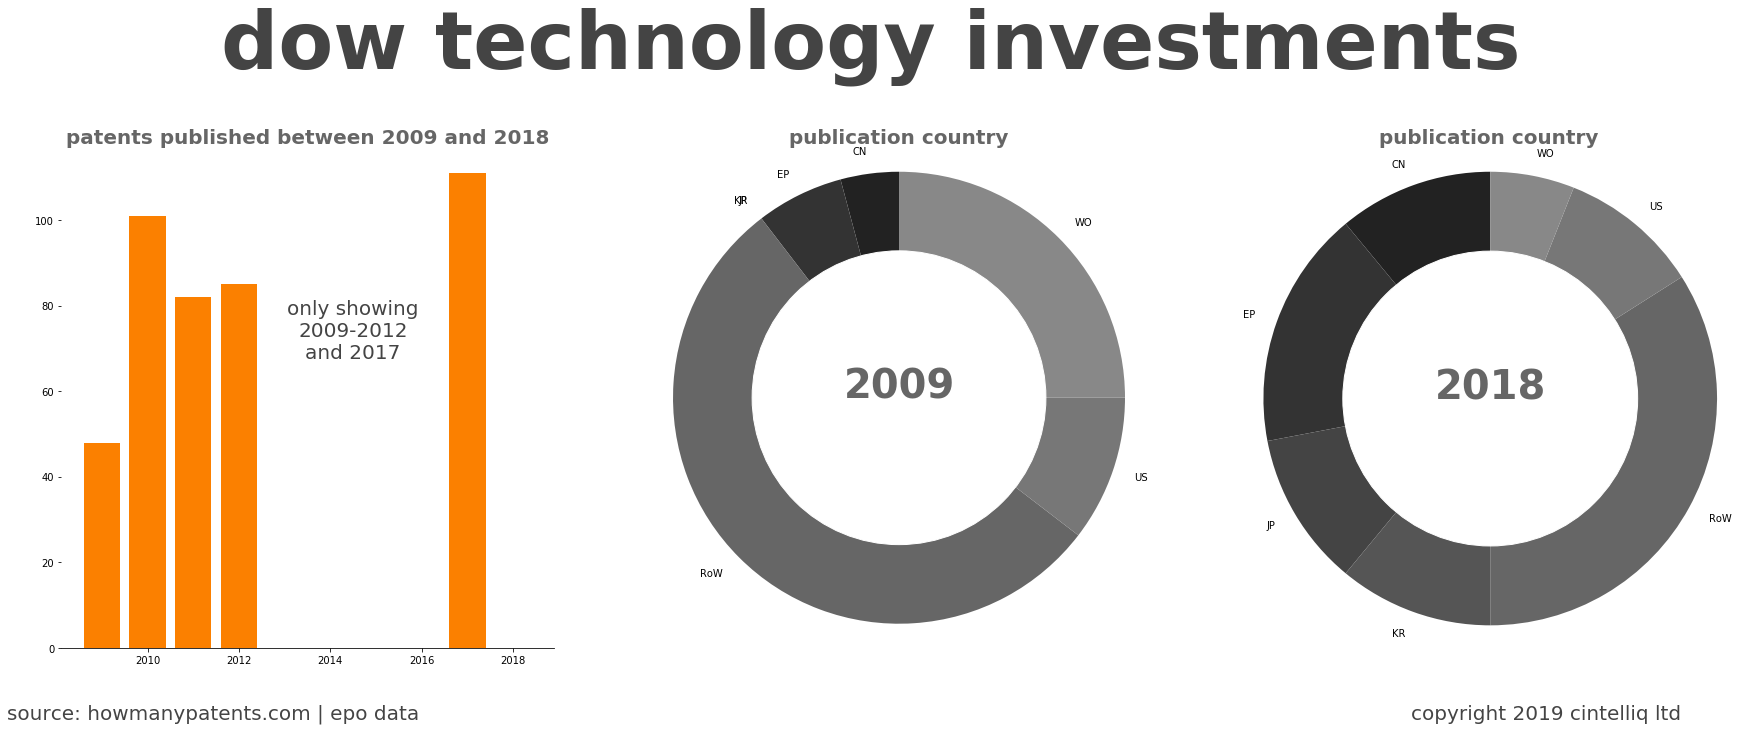 summary of patents for Dow Technology Investments